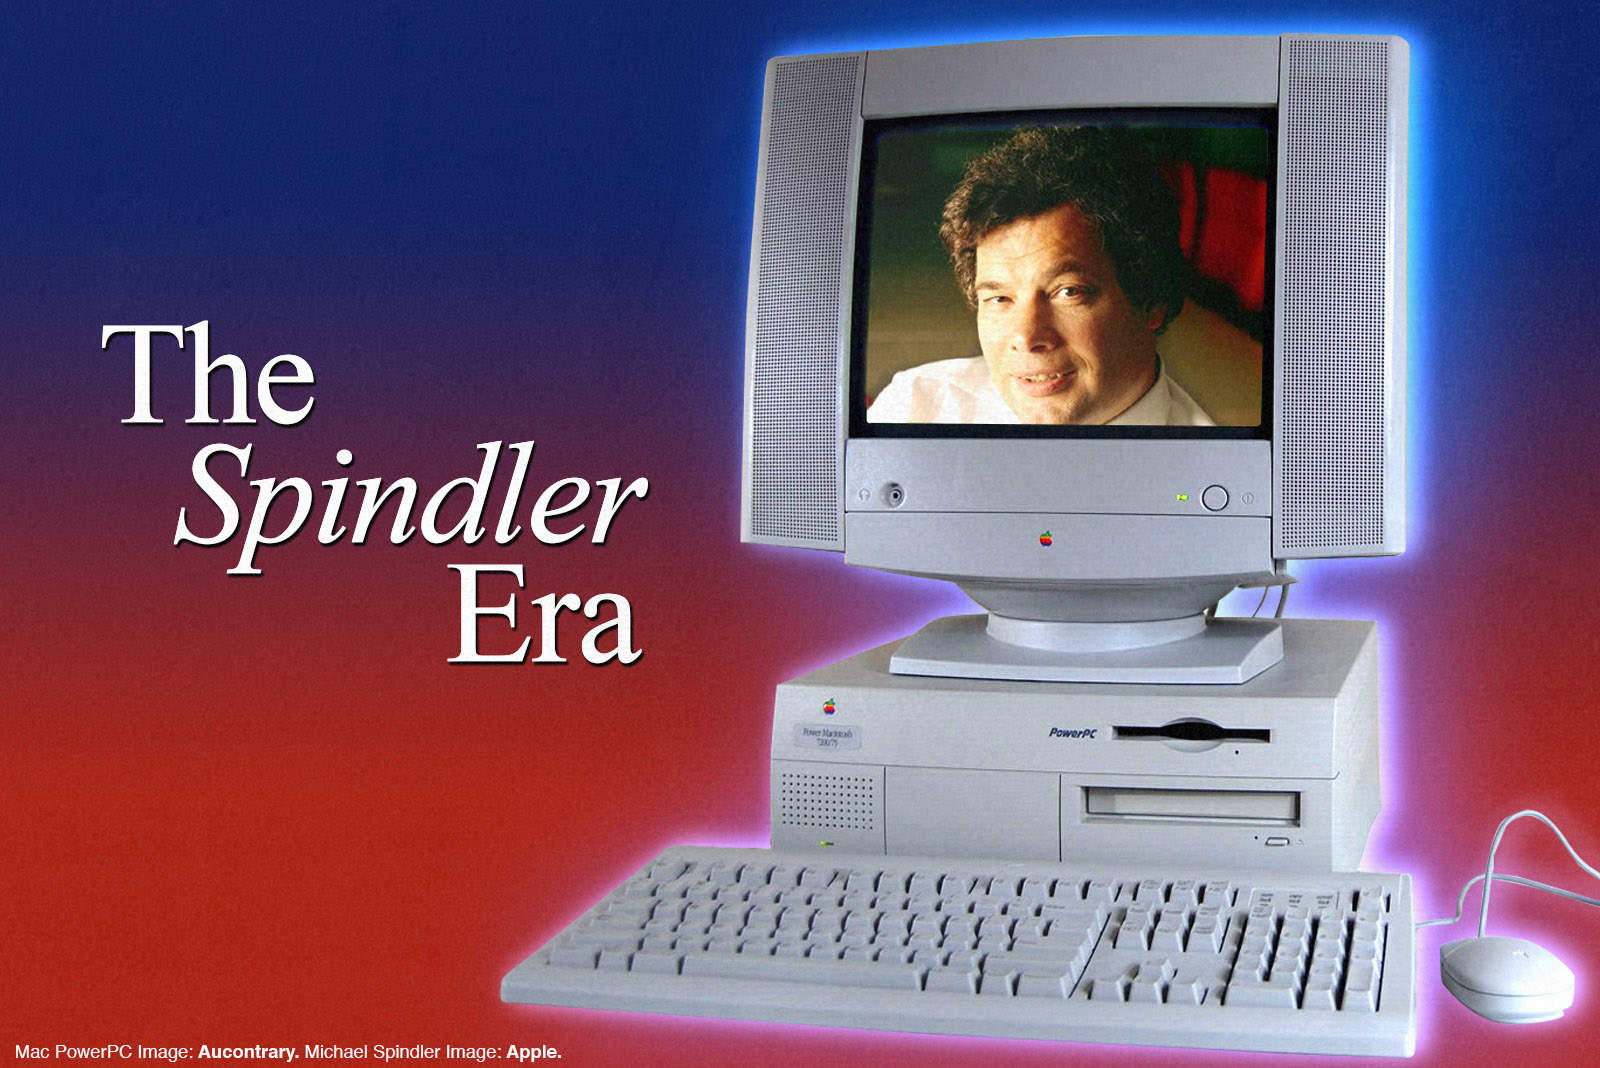 Apple CEO Michael Spindler headed the company during trying times in the 1990s.